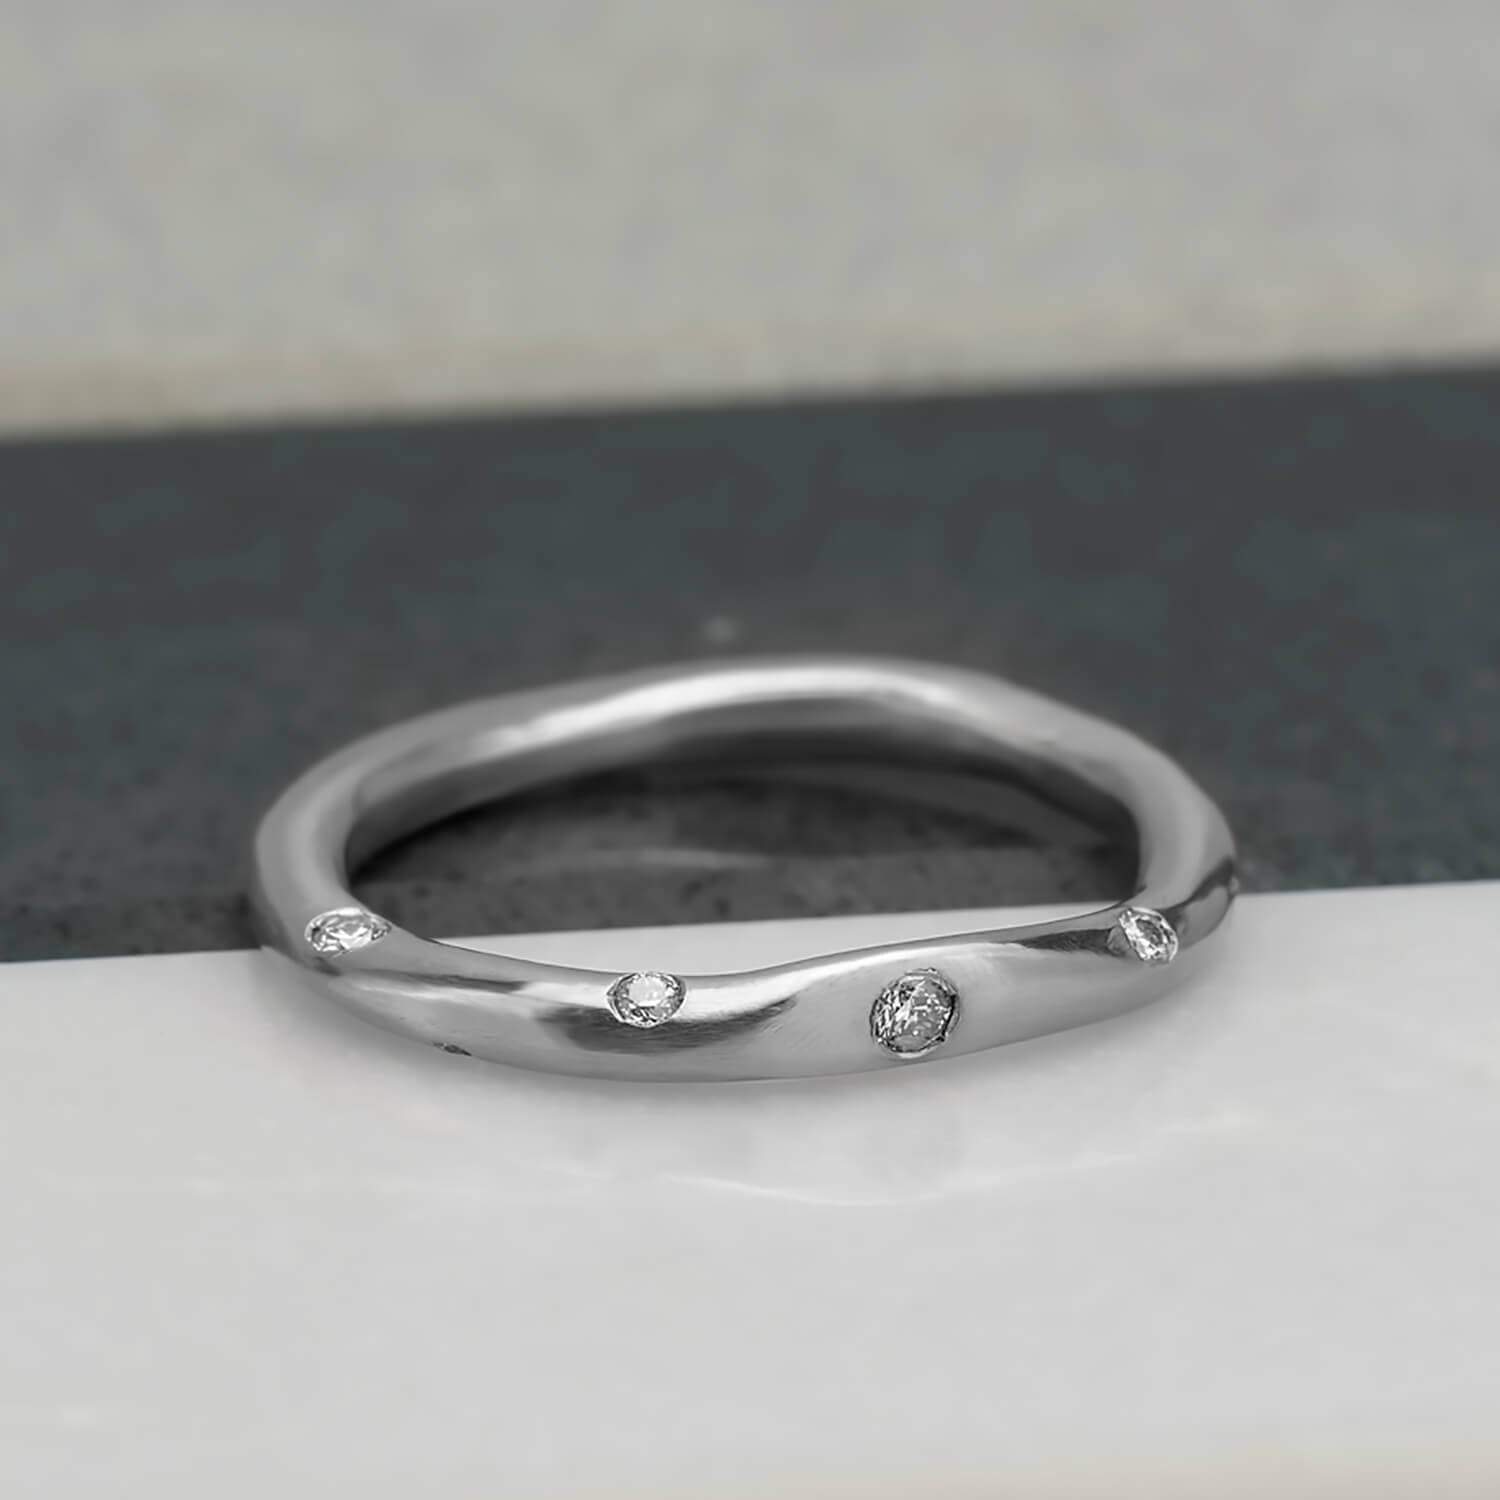 Organic, irregular shaped ring in 10 karat recycled white gold with a satin finish, flush set with 8 1.2mm colourless diamonds.